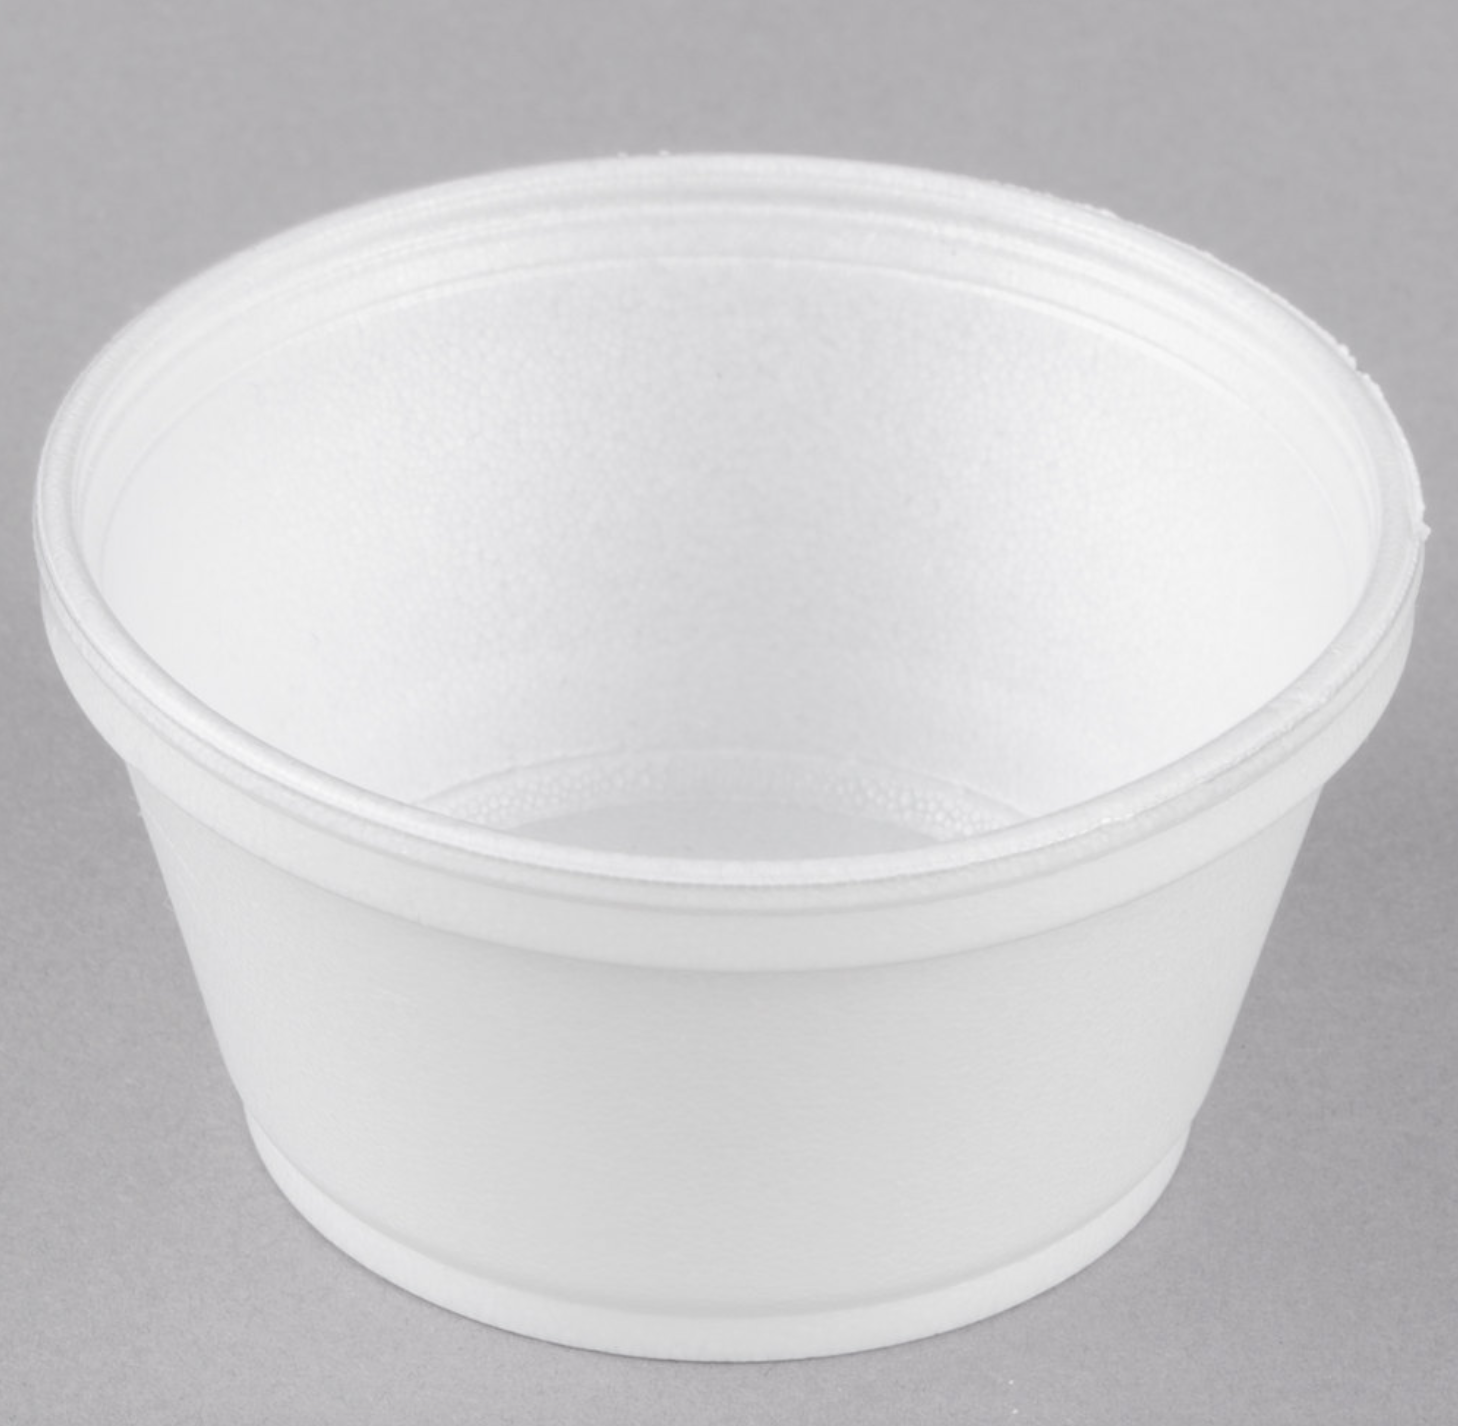 Dart Solo Extra Squat Container, White, 8 oz - 1000 count